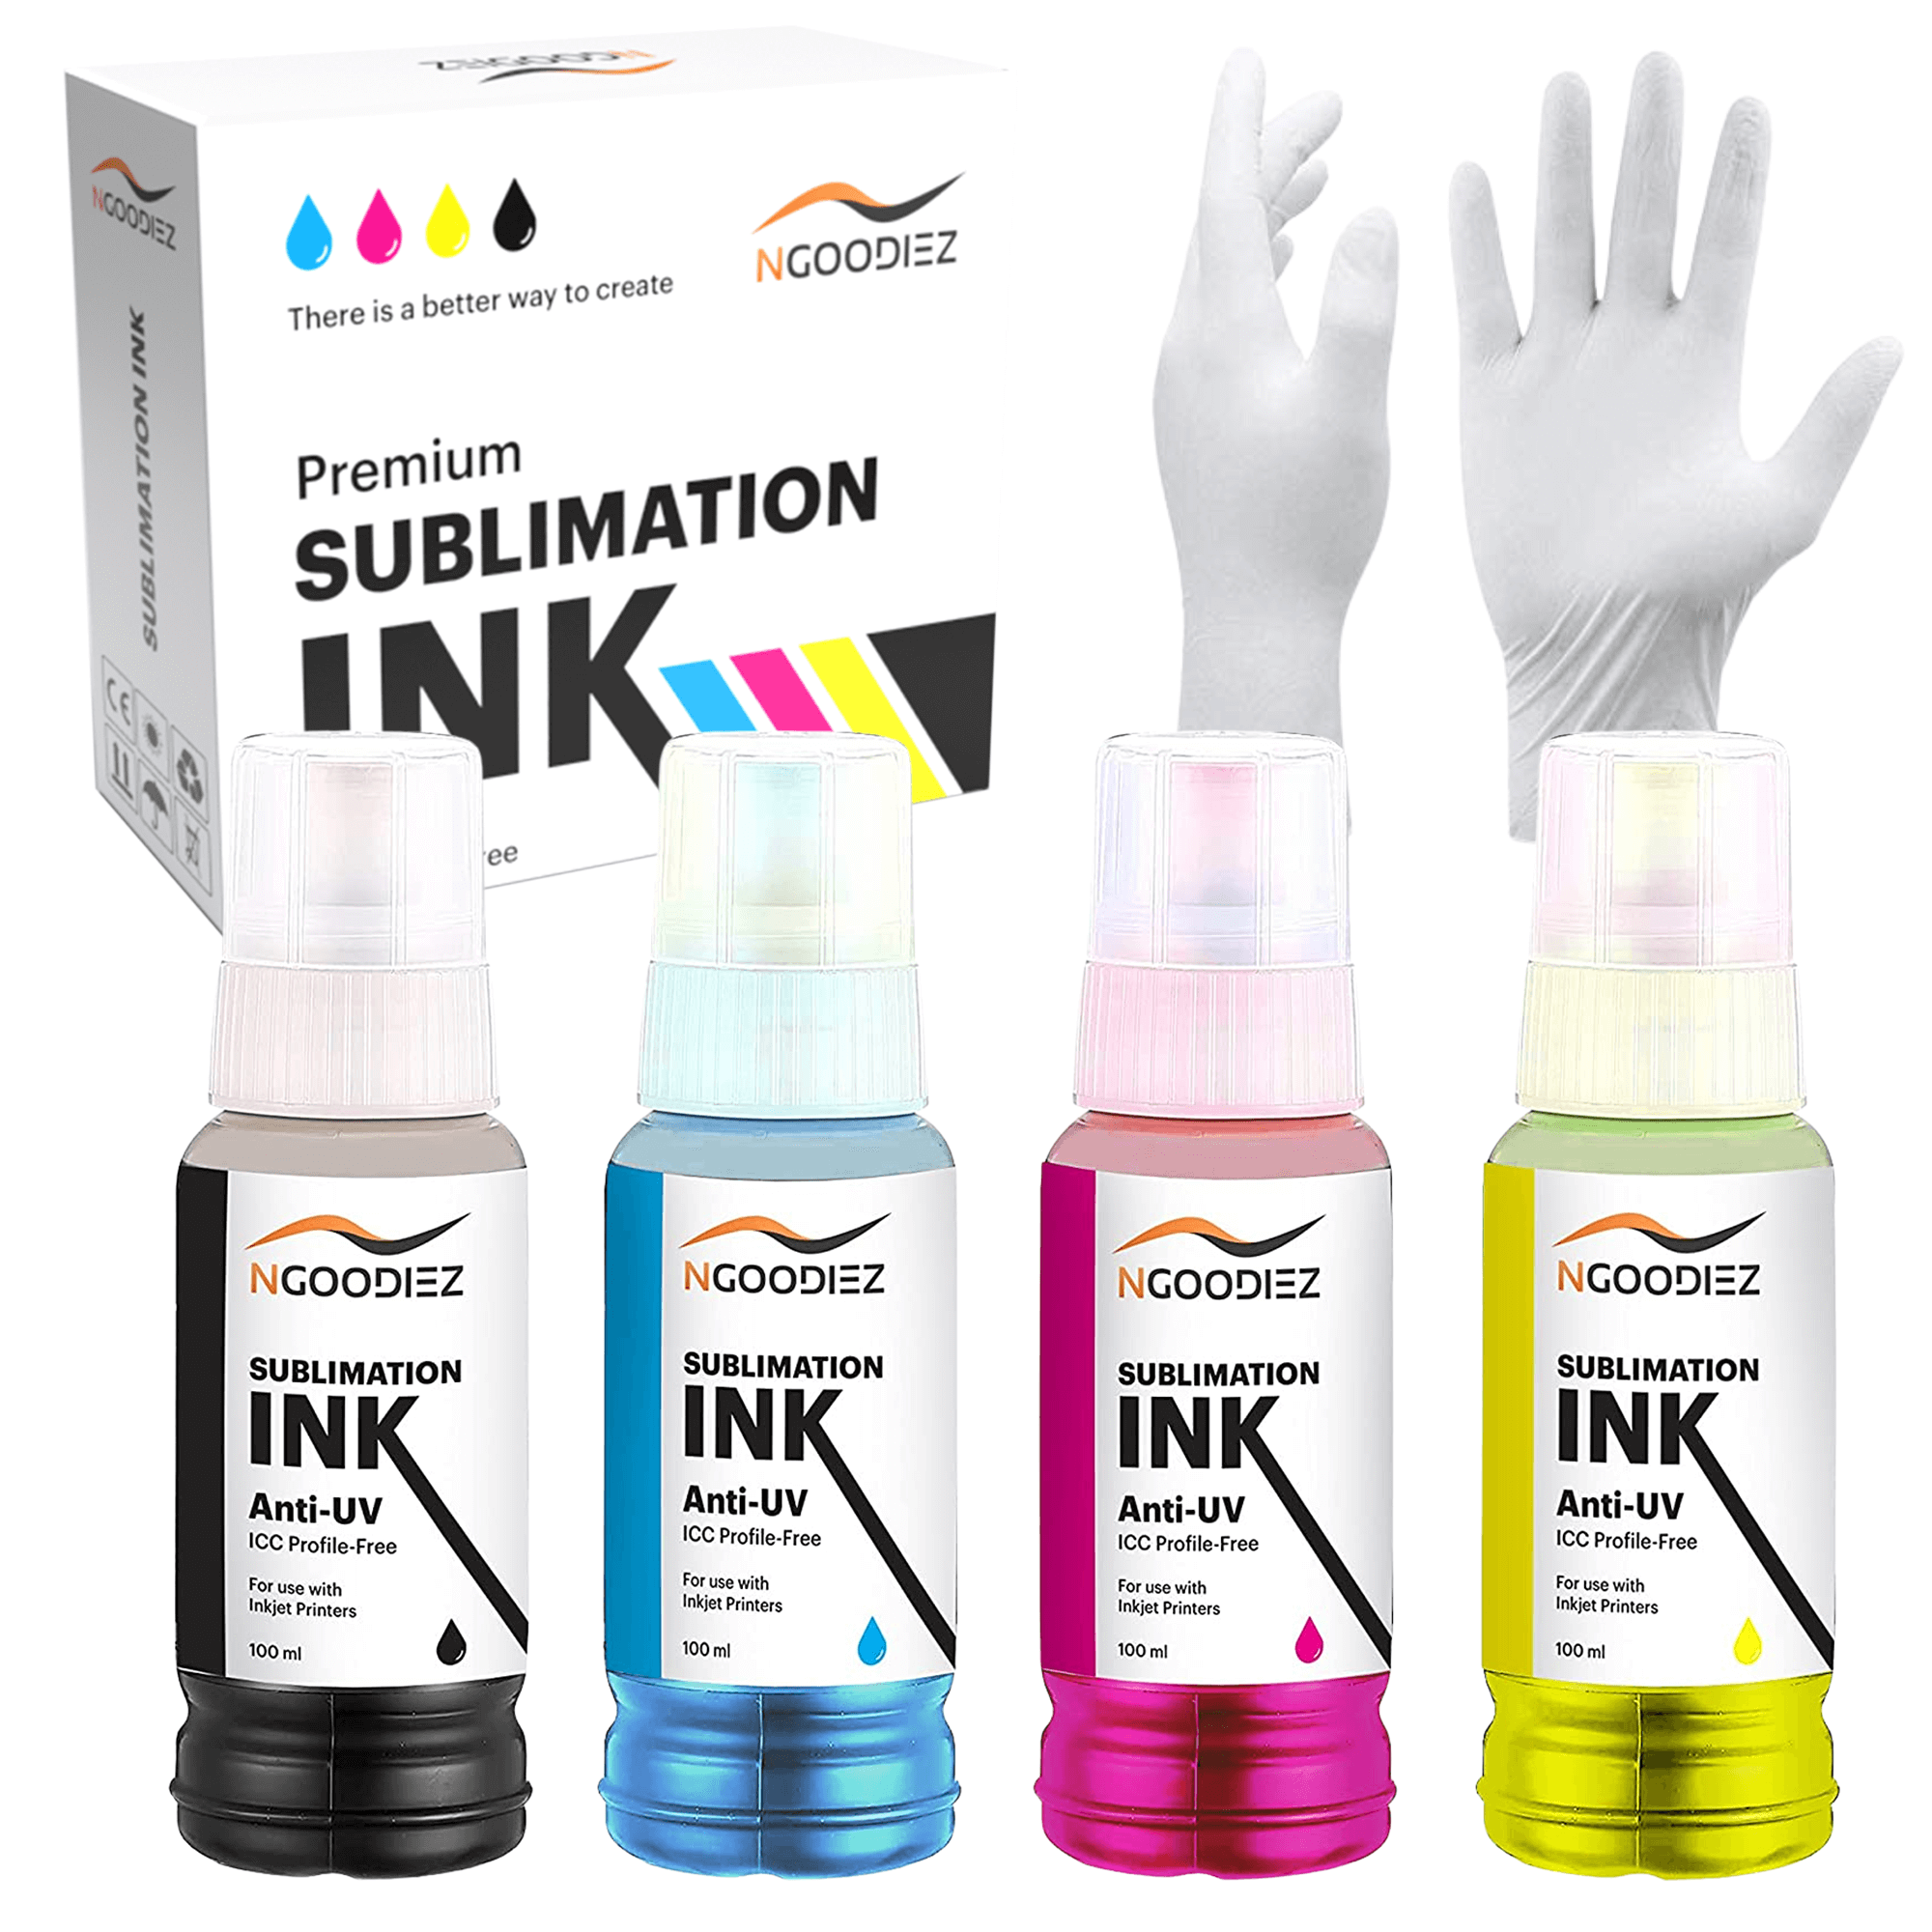  NGOODIEZ Sublimation Paper for Cotton Polyester T Shirt Fabric,  Mugs, Wood, Canvas, & More, Paper for Printer Compatible w/Any Inkjet  Printer w/Sublimation Ink, 100 A4 Sublimation Paper 8.5 x 11 